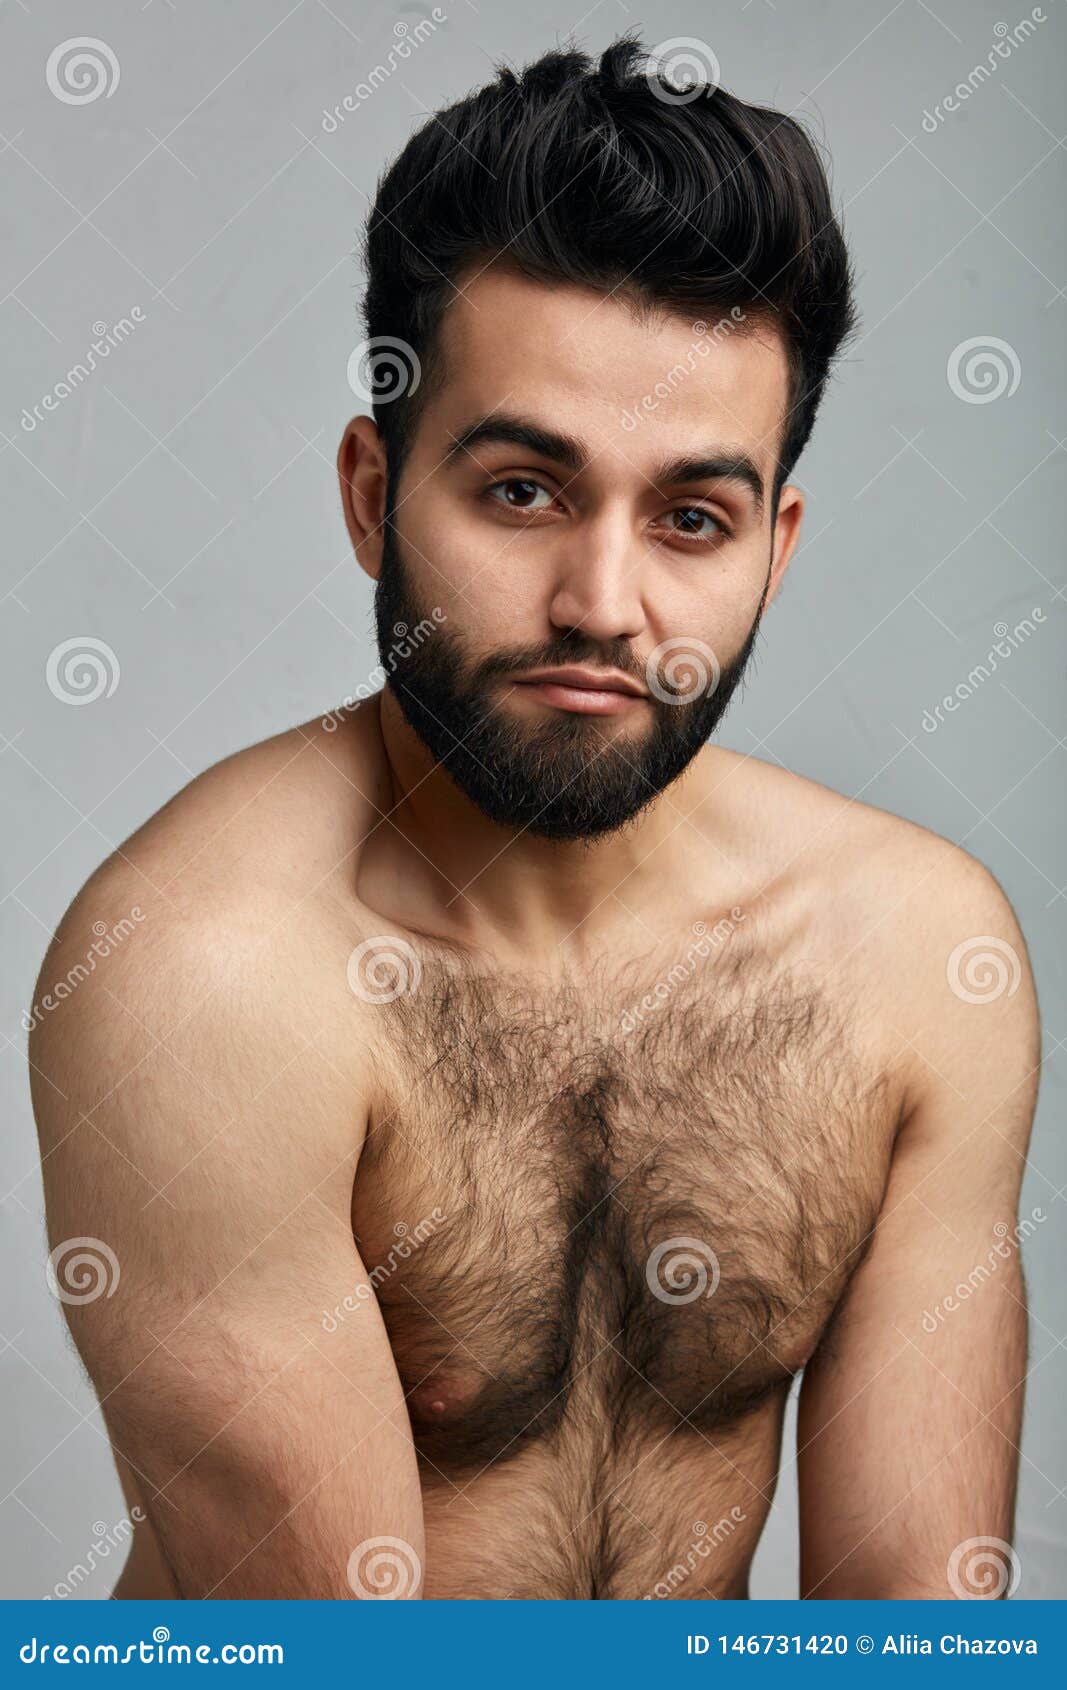 Why are guys hairy